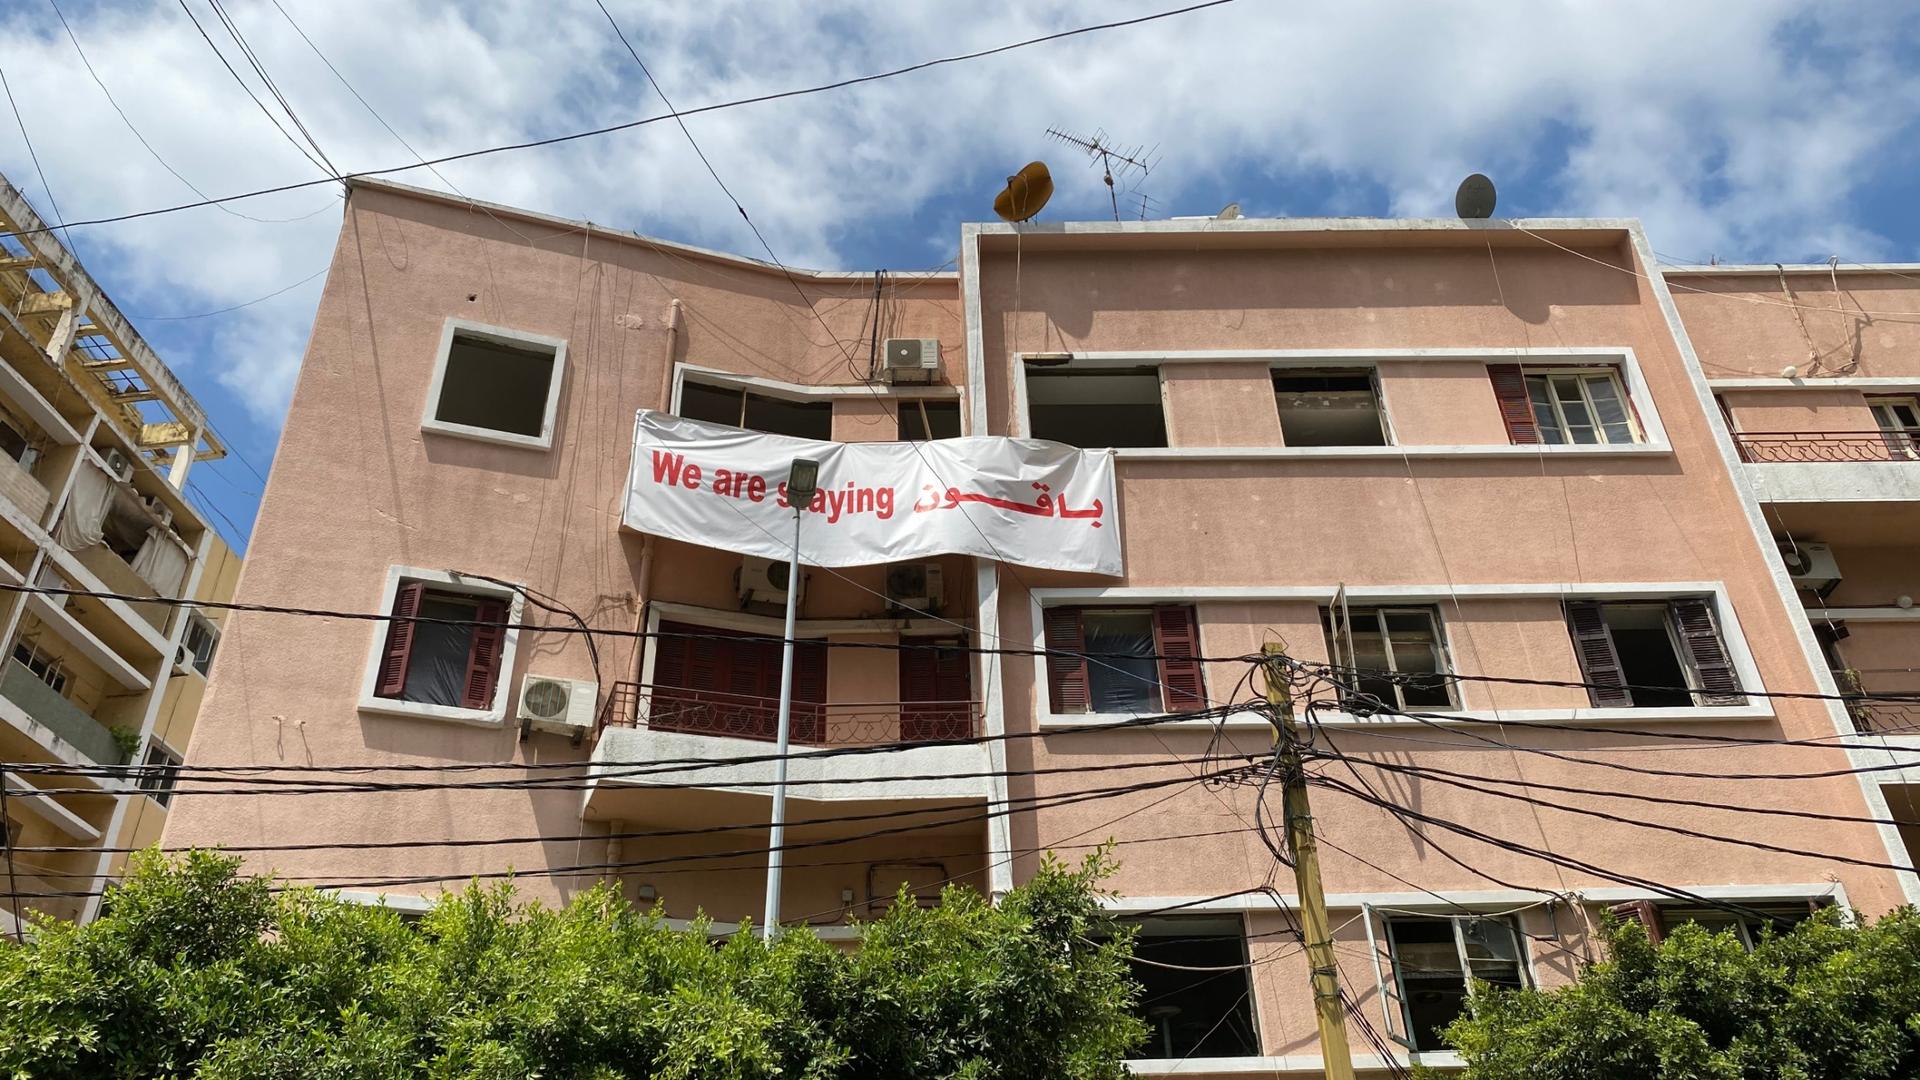 Defiant signs in a part of Beirut beset by rumors that developers are trying to push residents out. 